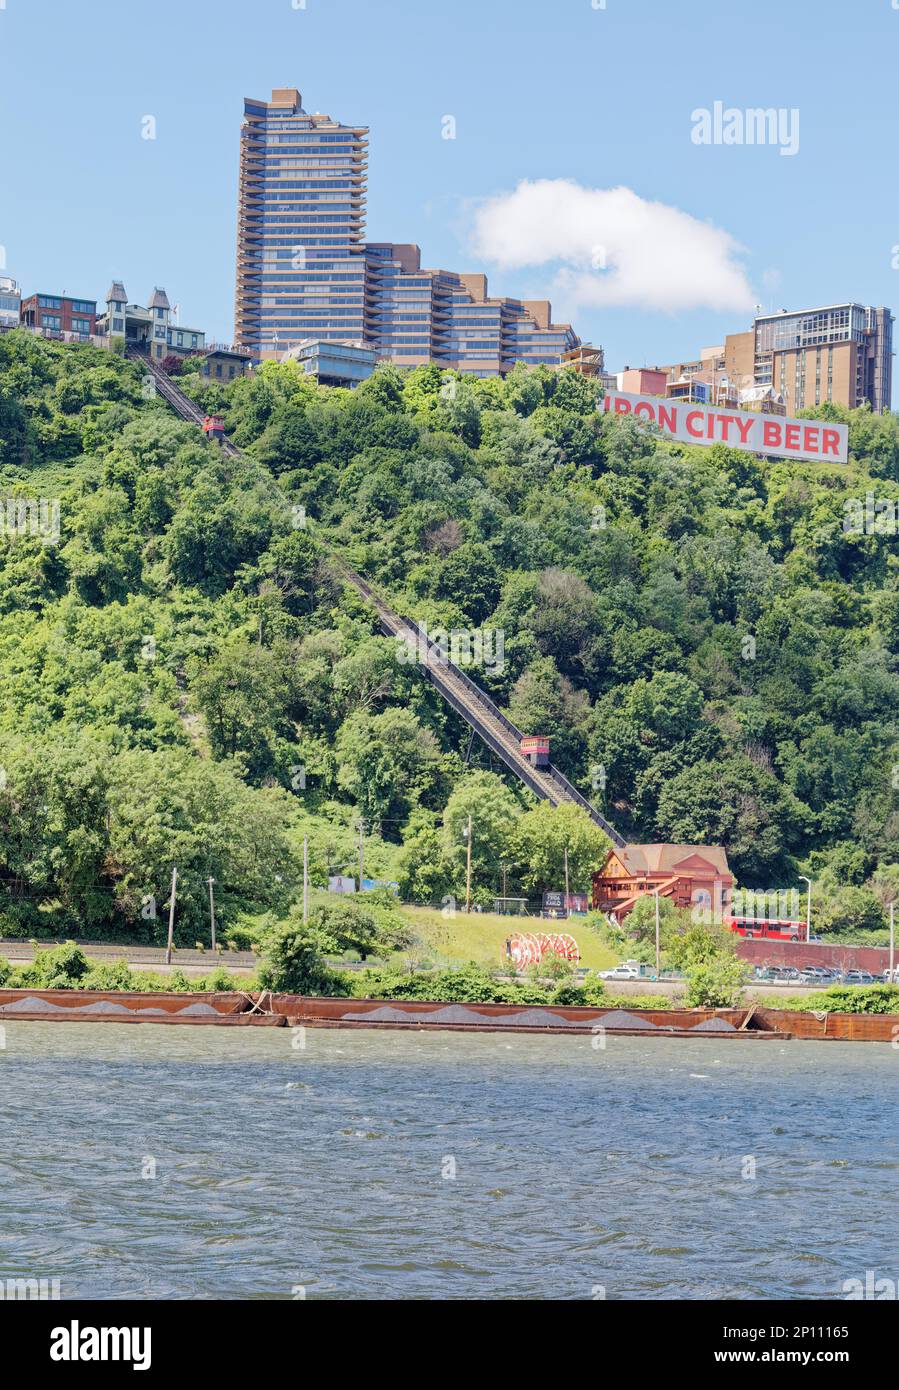 Pittsburgh South Shore: Landmark Duquesne Incline carries tourists and commuters up Mount Washington’s 30 degree slope from the Ohio River bank. Stock Photo